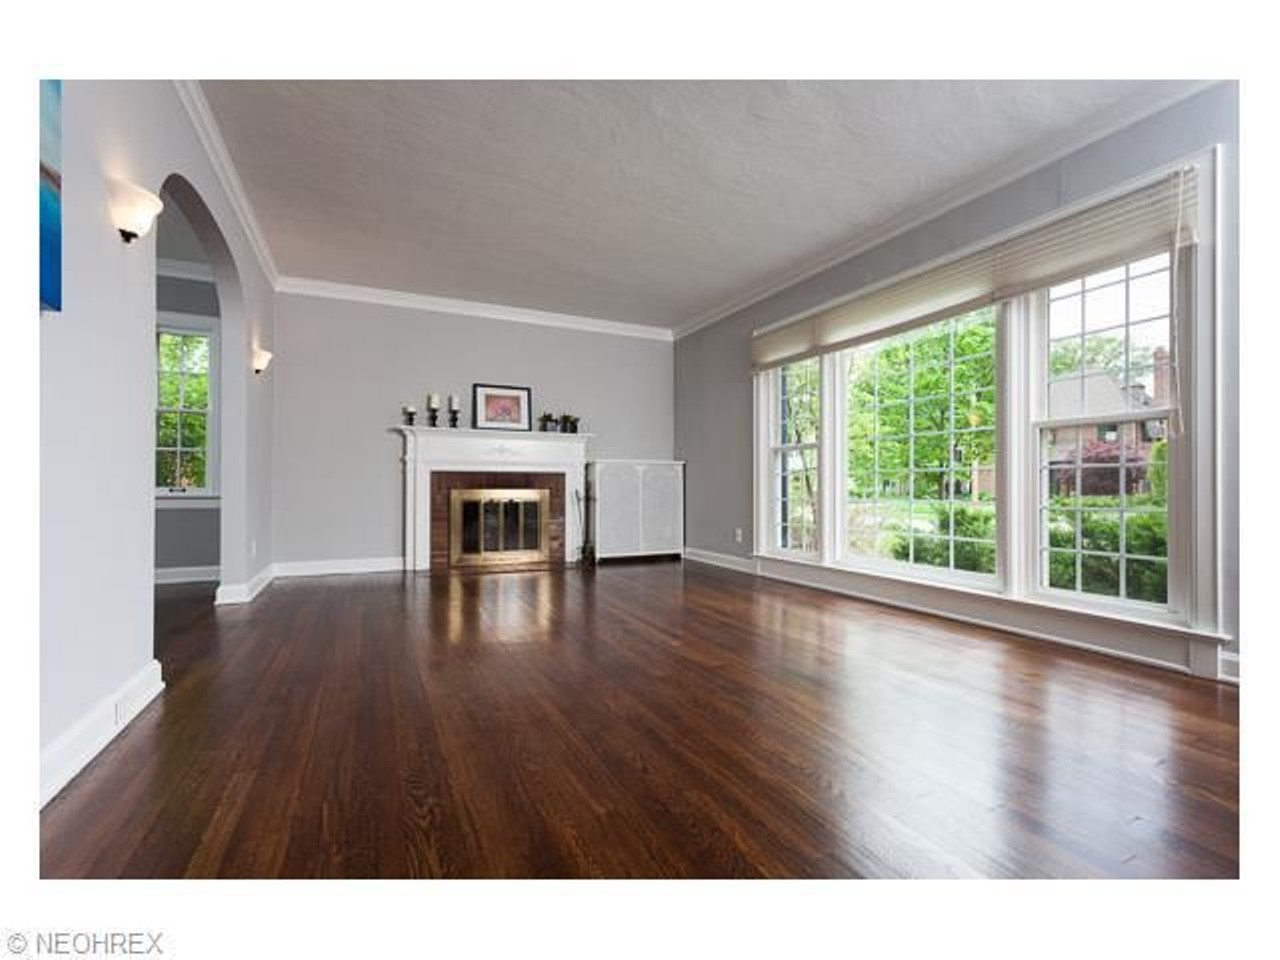 52 Photos of Super Affordable Homes For Sale Right Now in Shaker